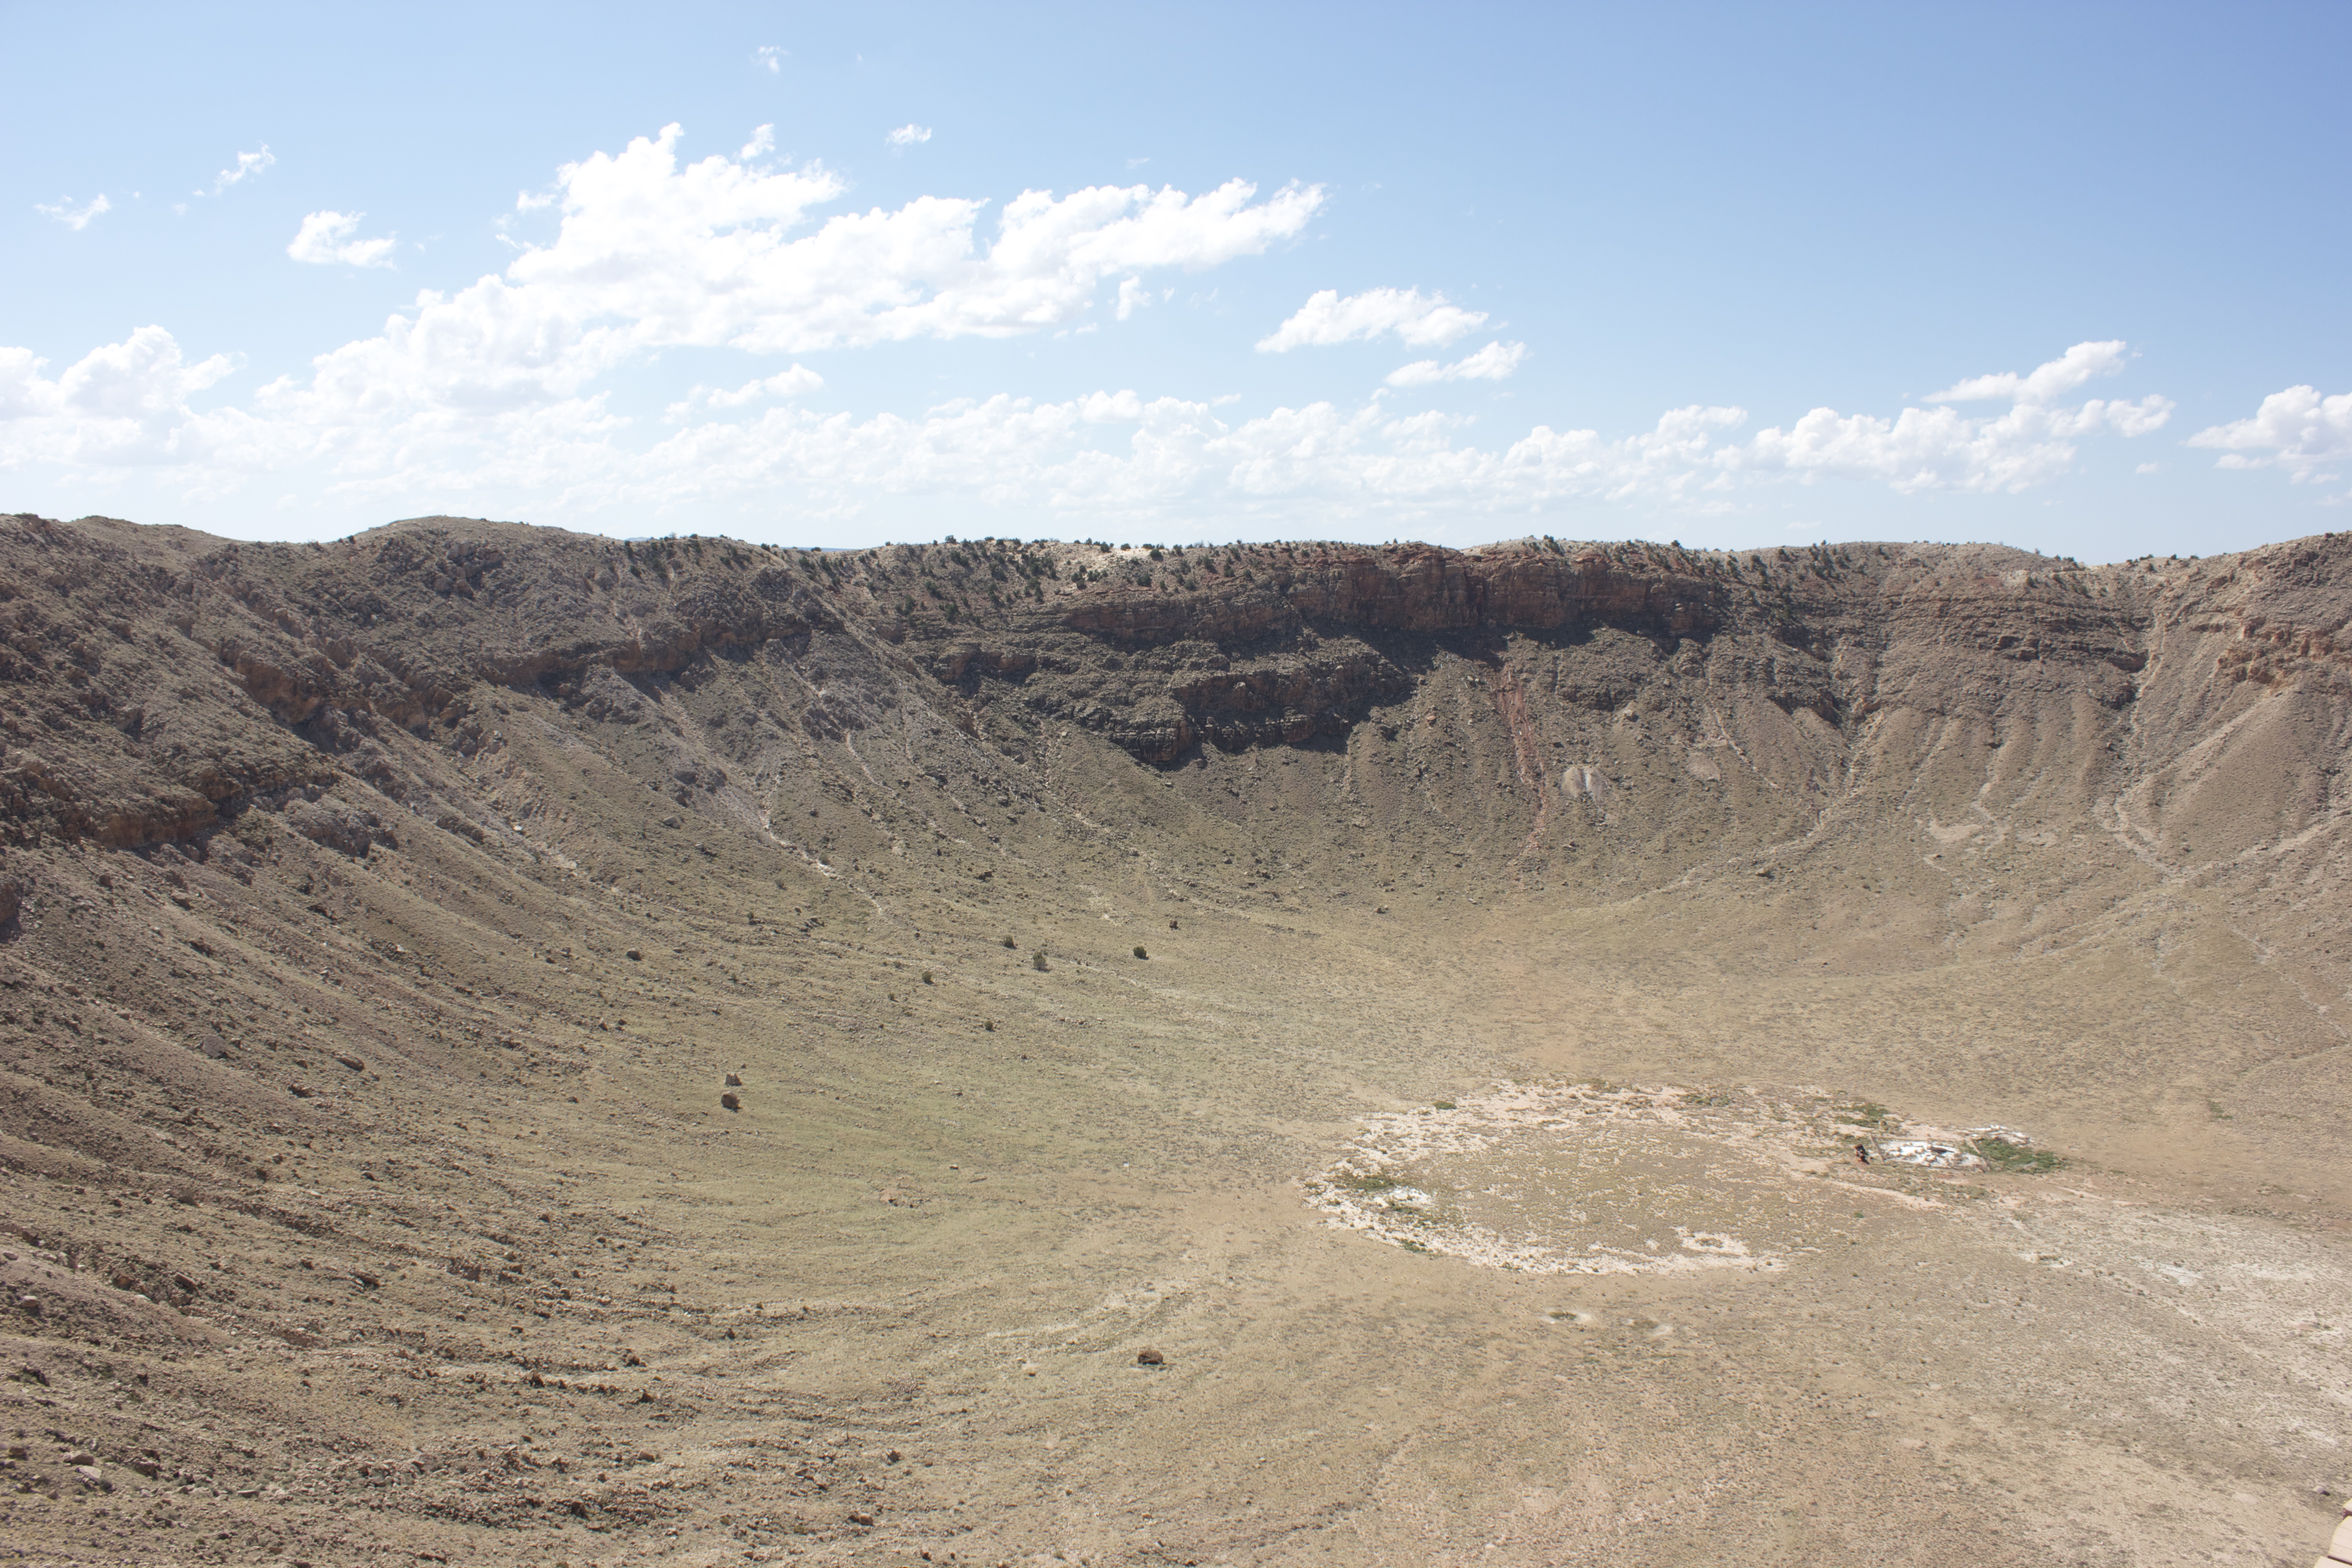 Meteor Crater, a meteorite impact crater near Winslow Arizona (and the largest in the United States).